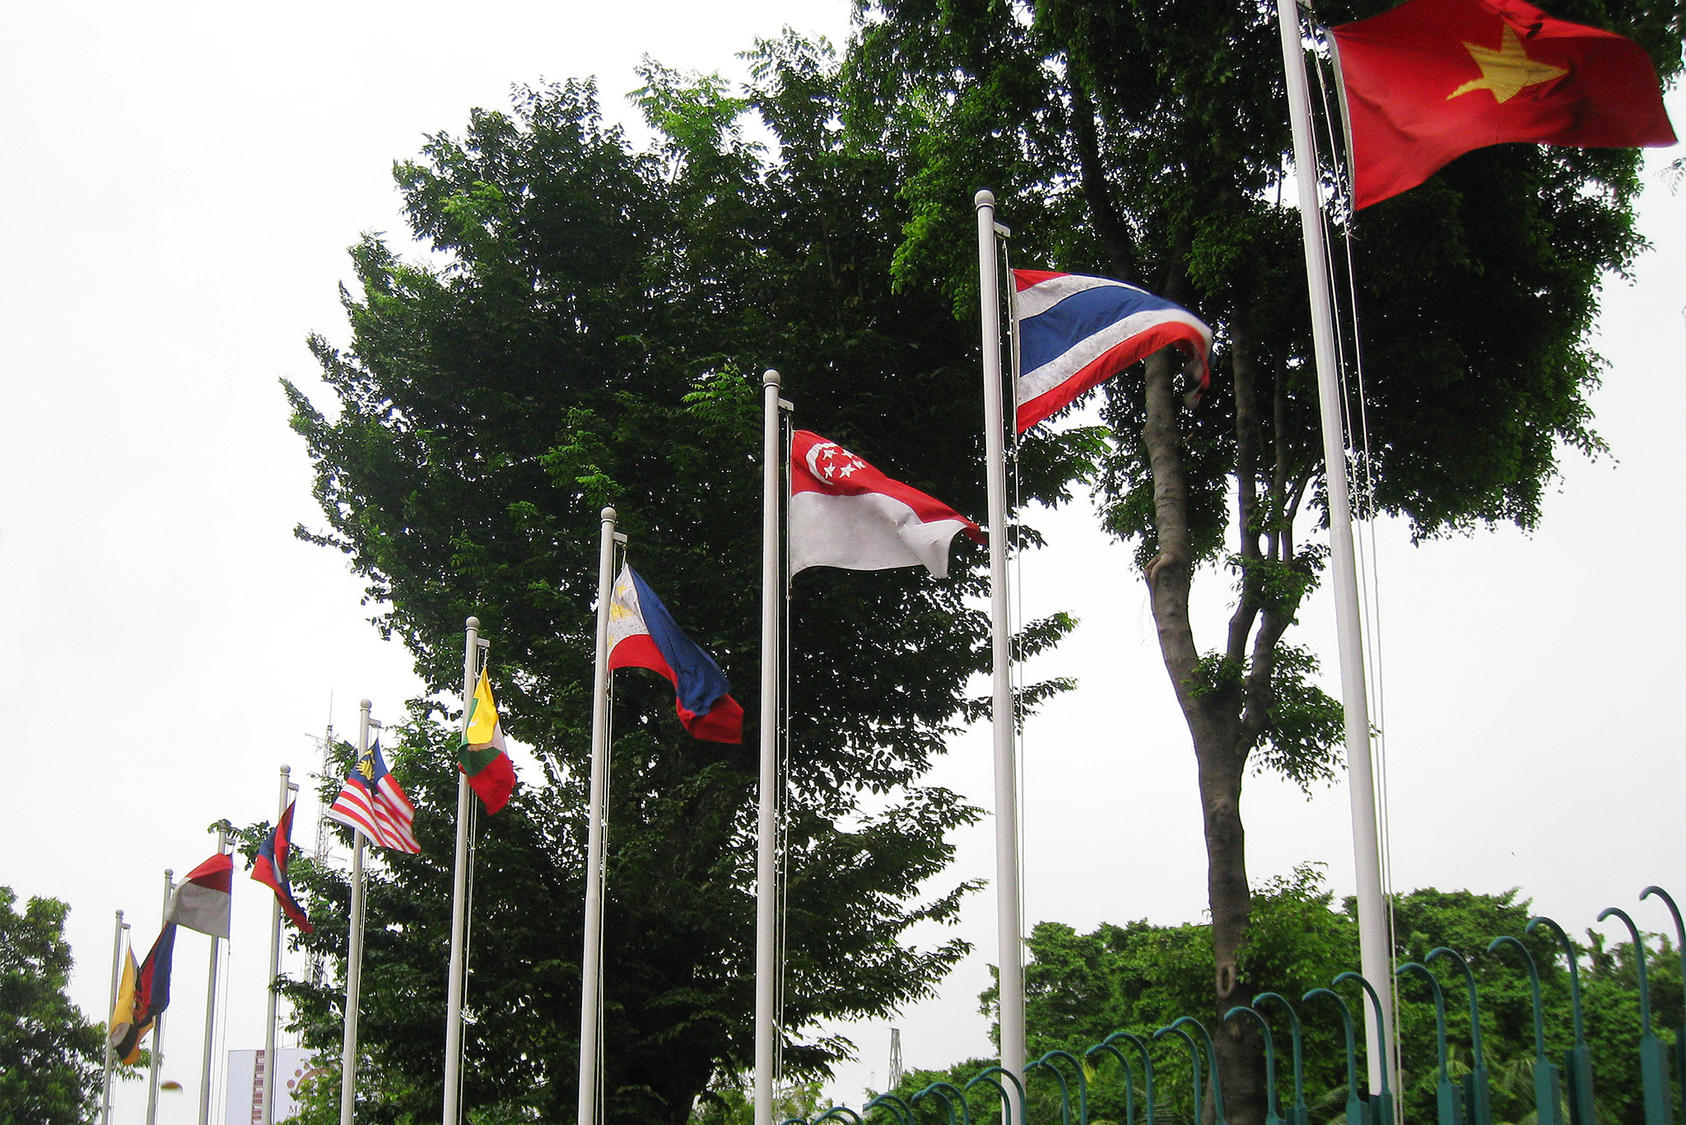 The flags of Association of Southeast Asia Nations (ASEAN) members in ASEAN headquarter at Jalan Sisingamangaraja No.70A, South Jakarta, Indonesia. From left the flags of: Brunei, Cambodia, Indonesia, Laos, Malaysia, Myanmar, Philippines, Singapore, Thailand, Vietnam. (Wikimedia Commons)